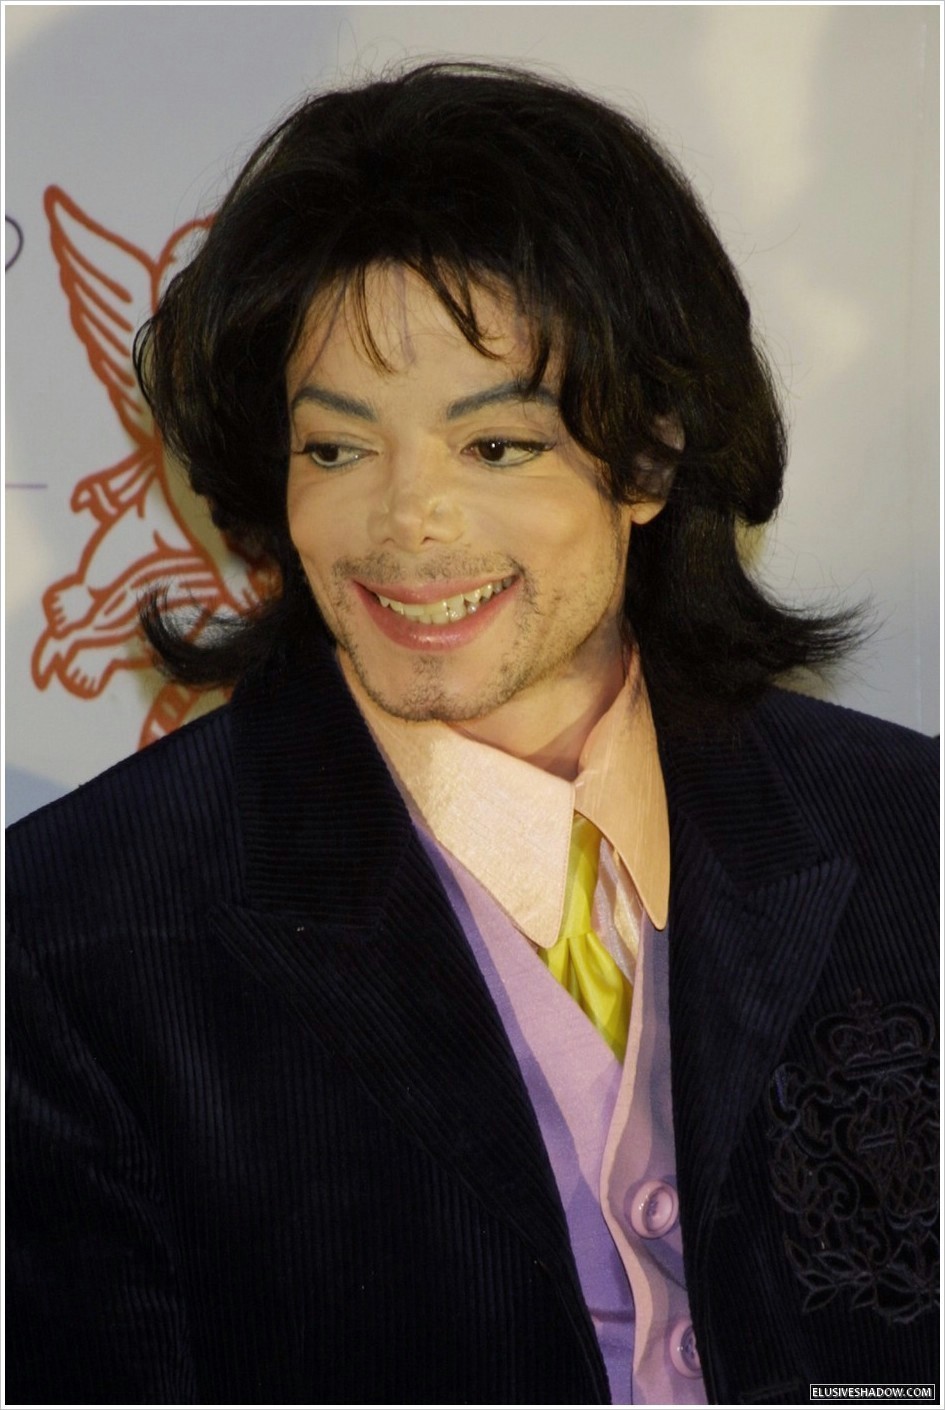 Michael Jackson Image Look At His Sweet Smile HD Wallpaper And